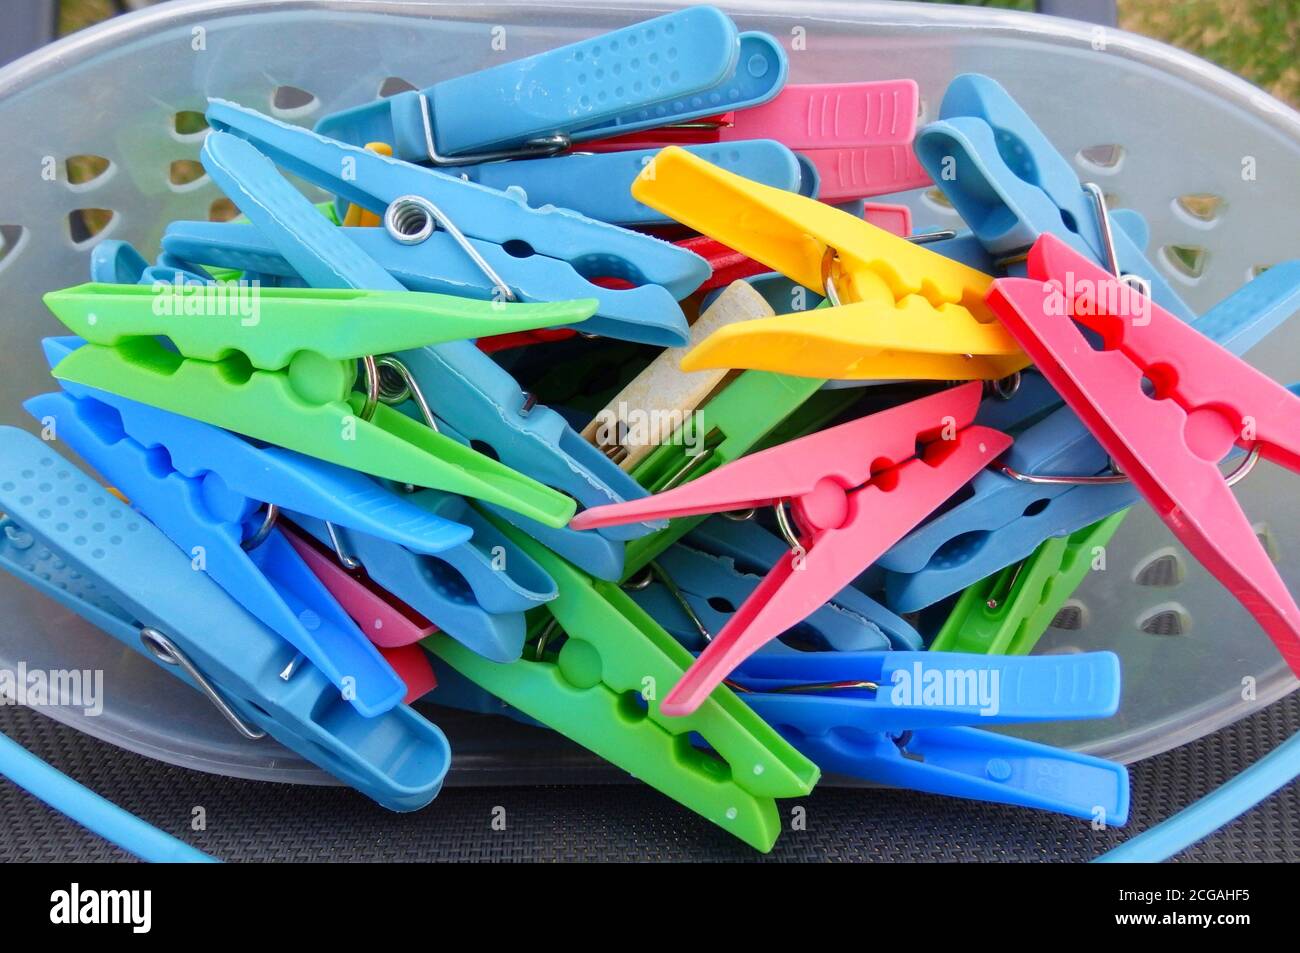 A basket of plastic clothes pegs, Queensland, Australia Stock Photo